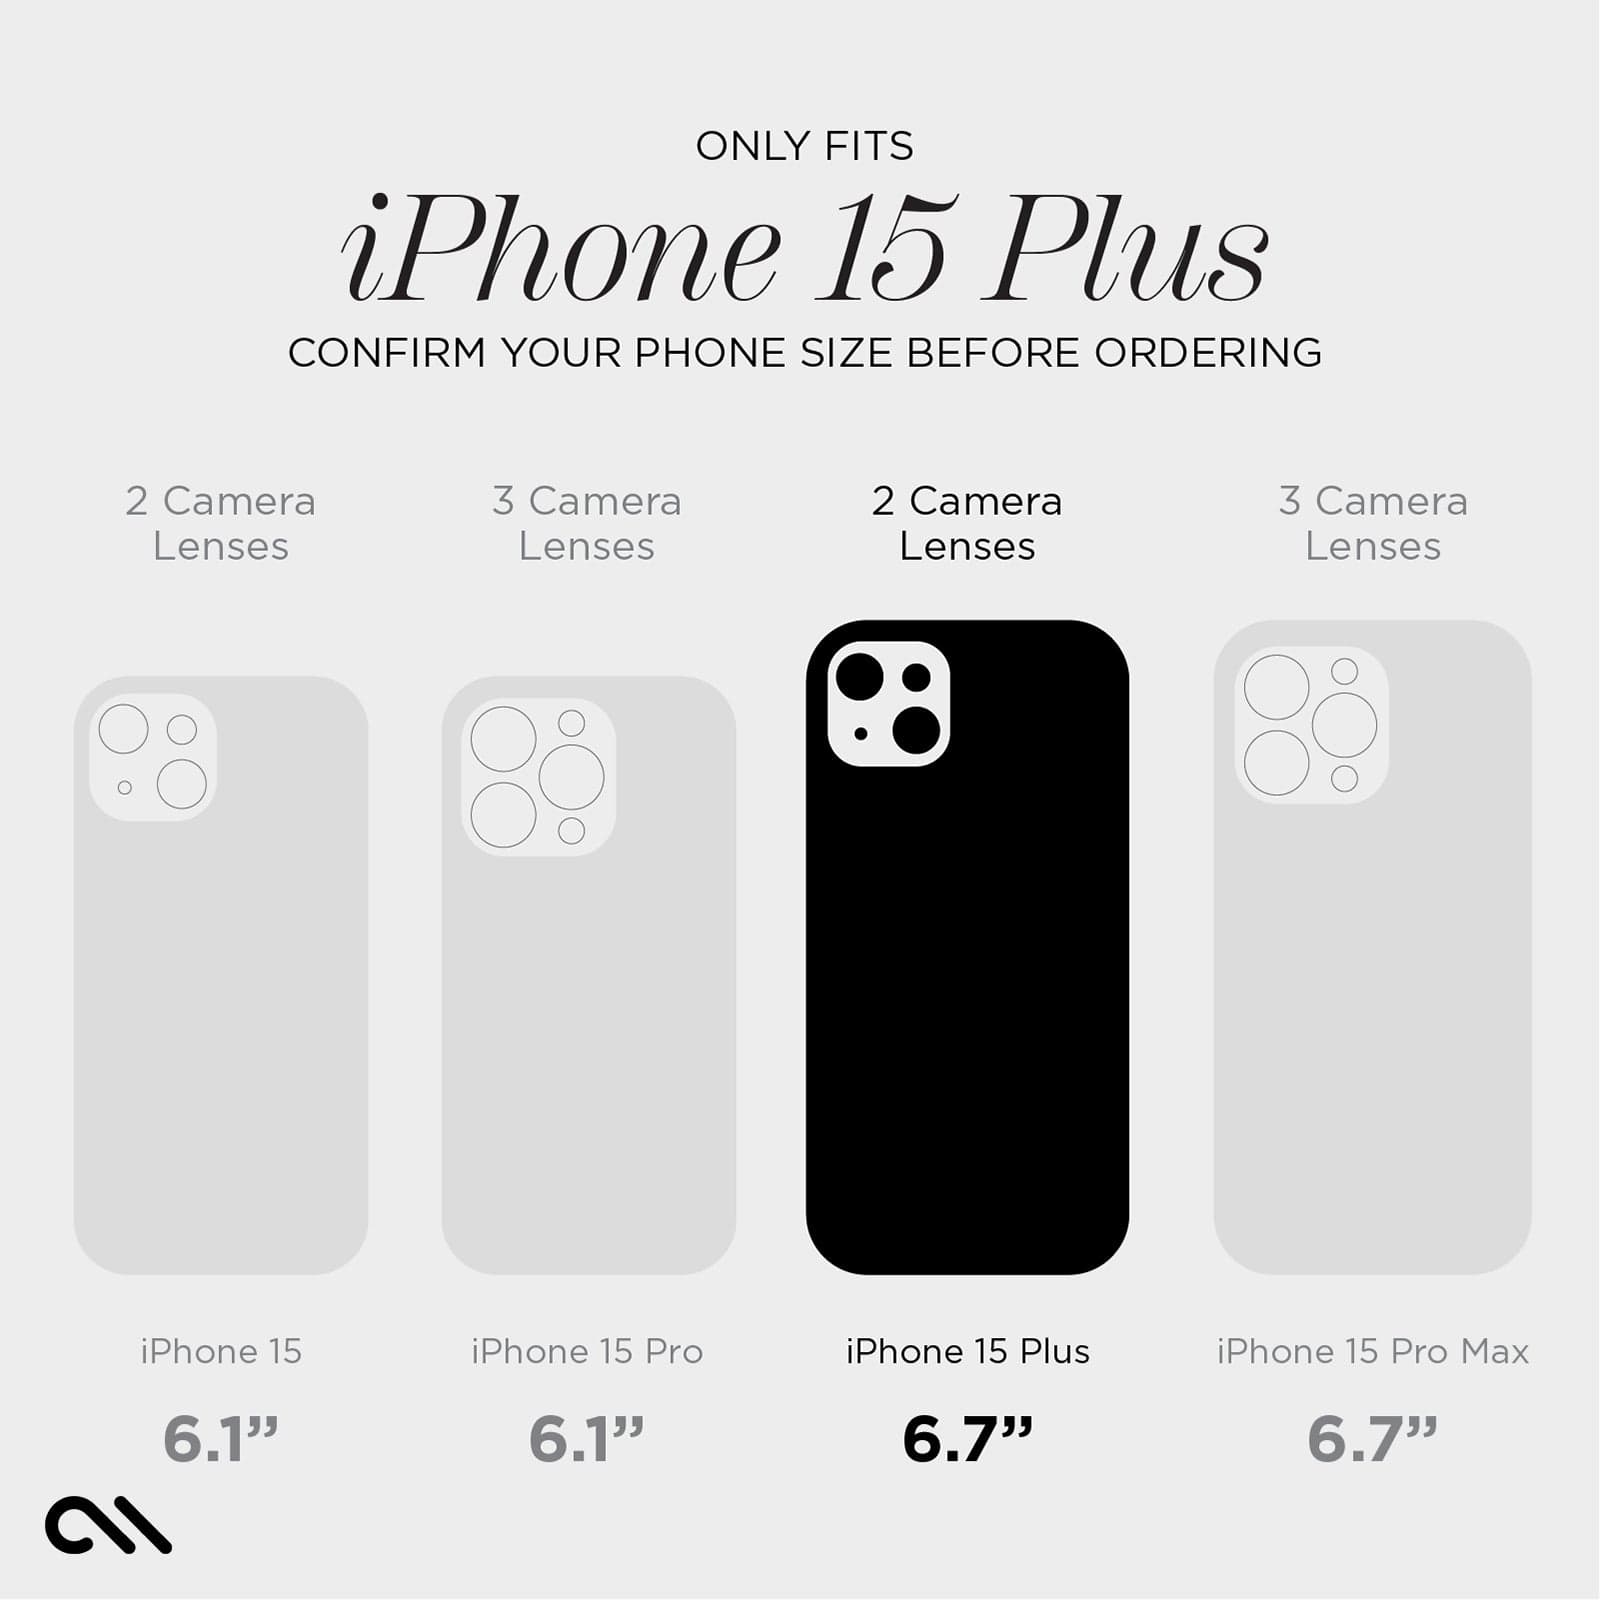 ONLY FITS IPHONE 15 PLUS. CONFIRM YOUR PHONE SIZE BEFORE ORDERING